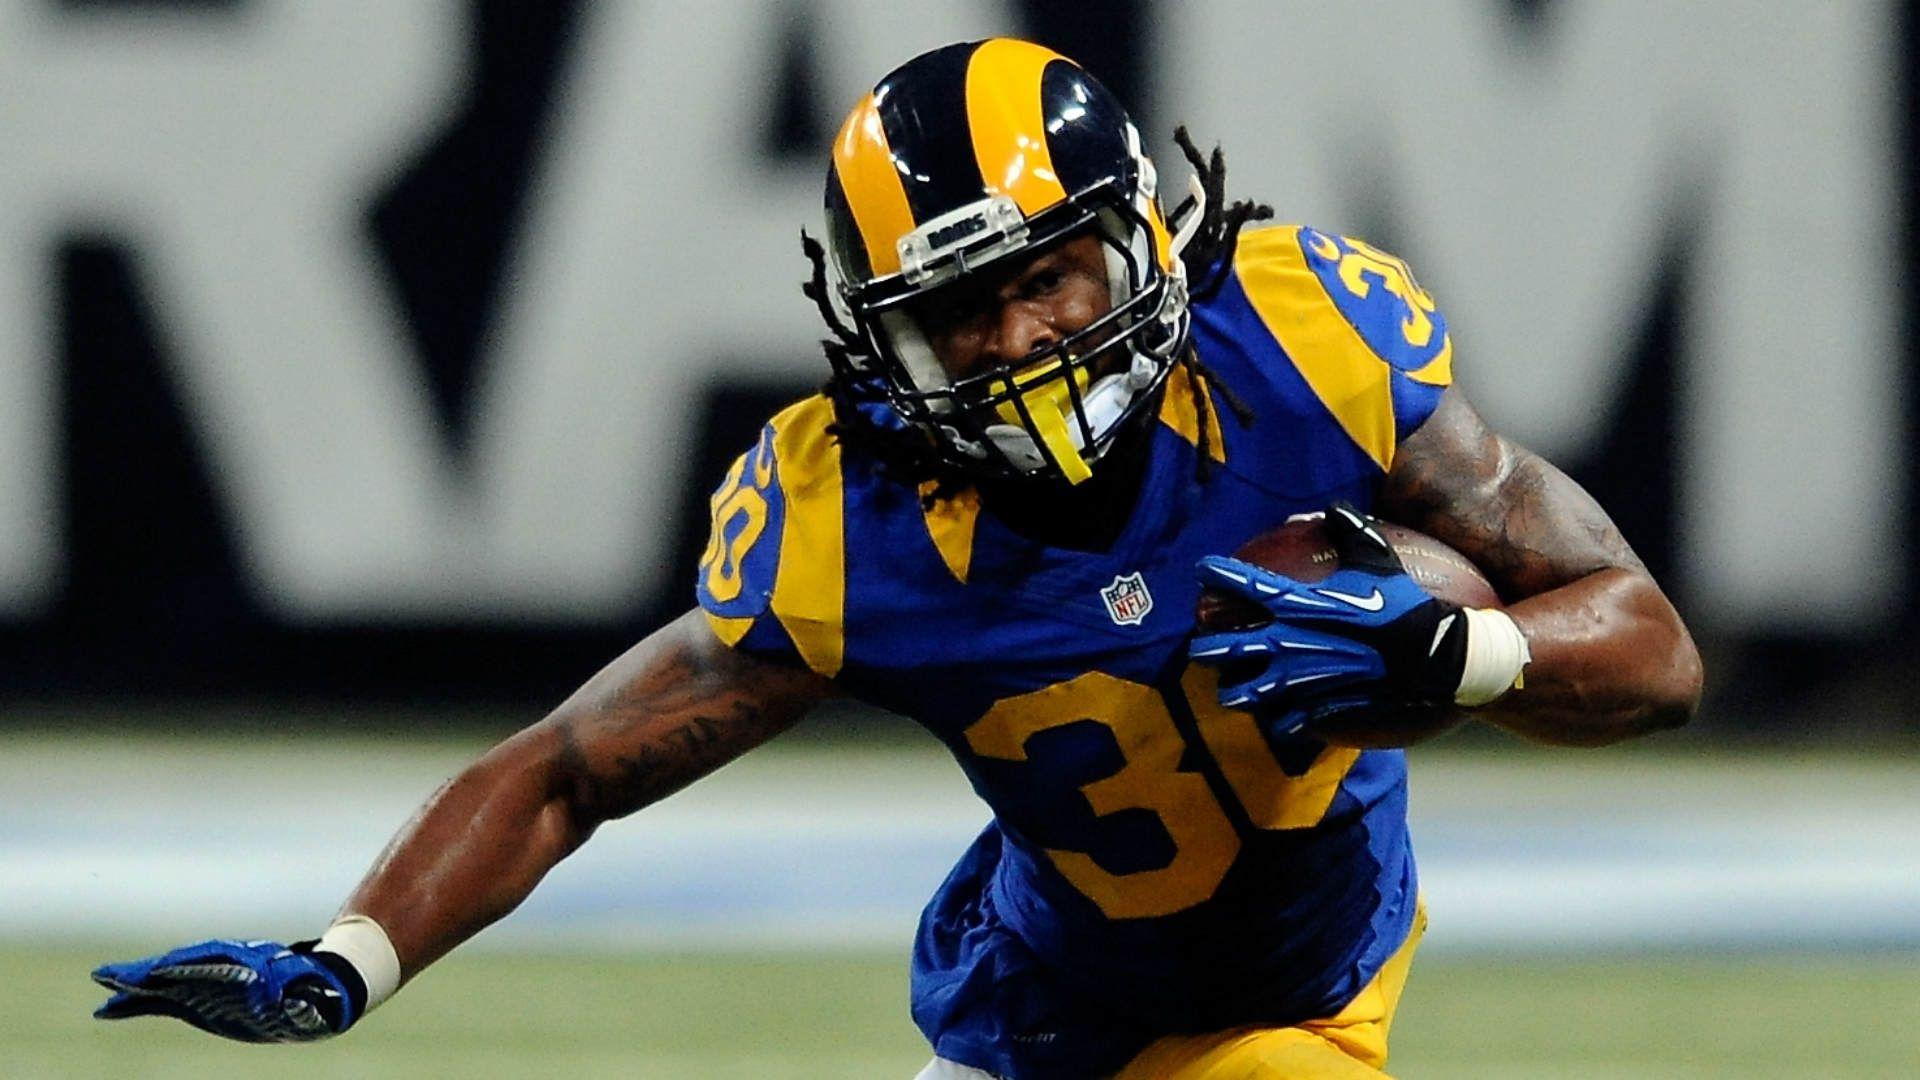 Sporting News NFL Rookie of the Year: Todd Gurley rescuing Rams